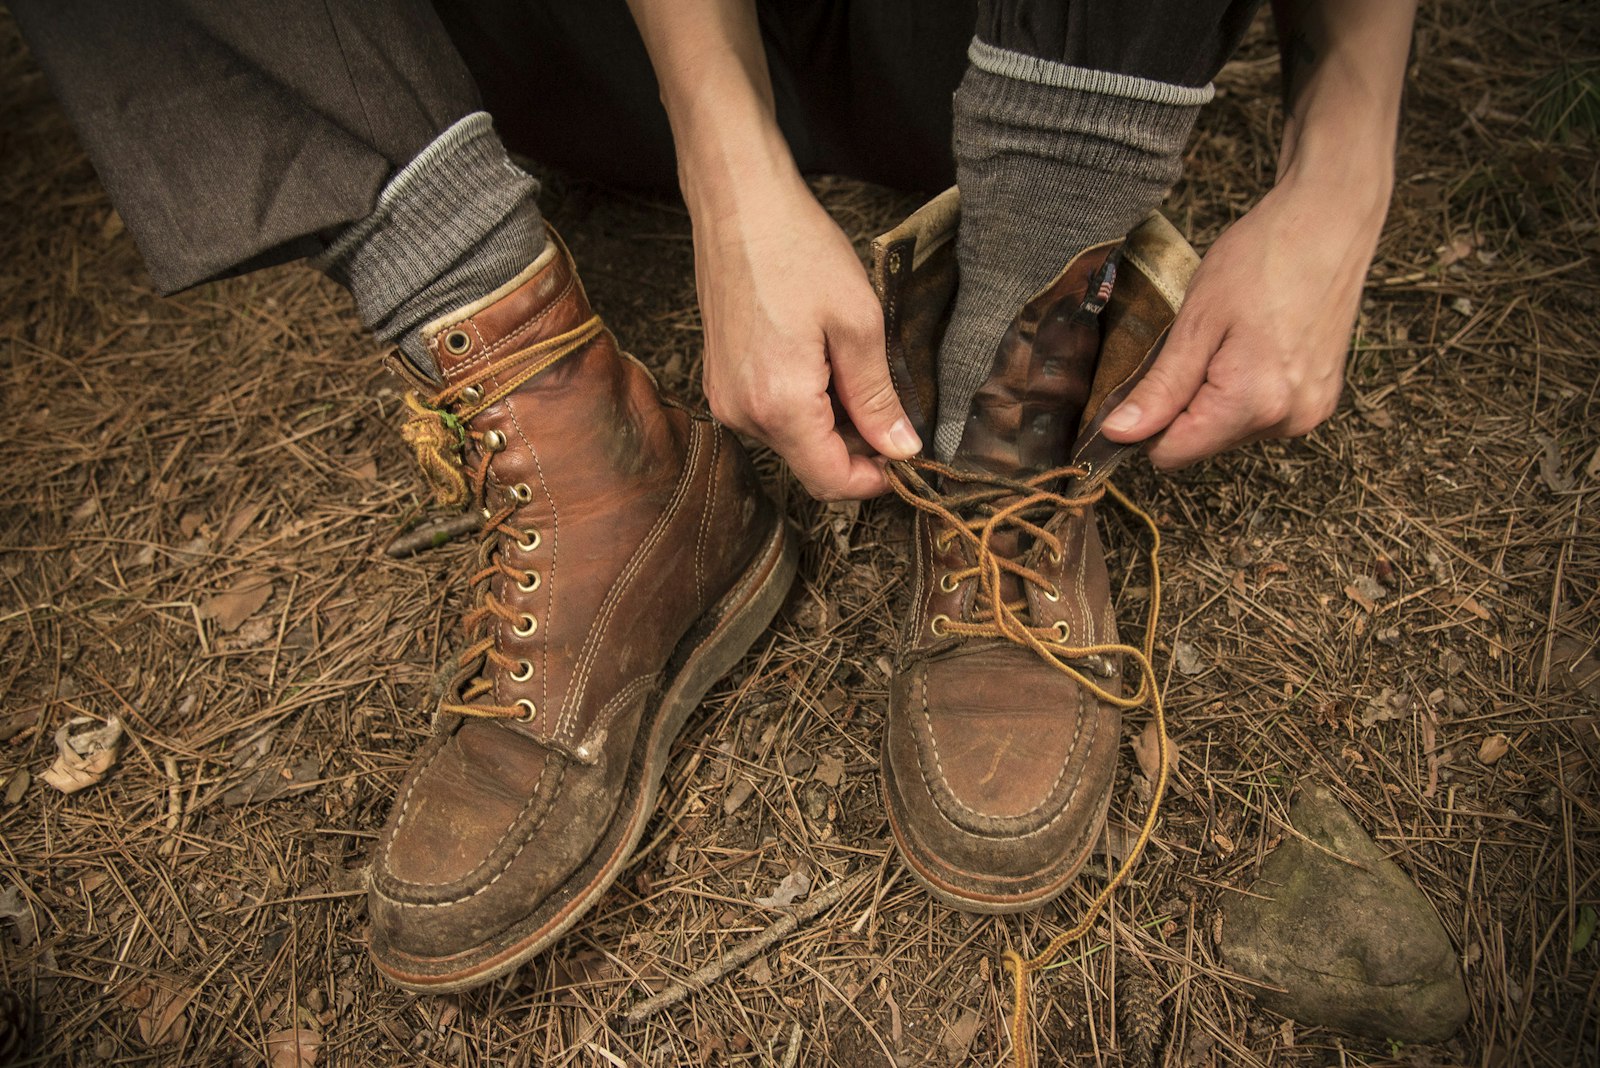 A person reaches down to tike their hiking boots.